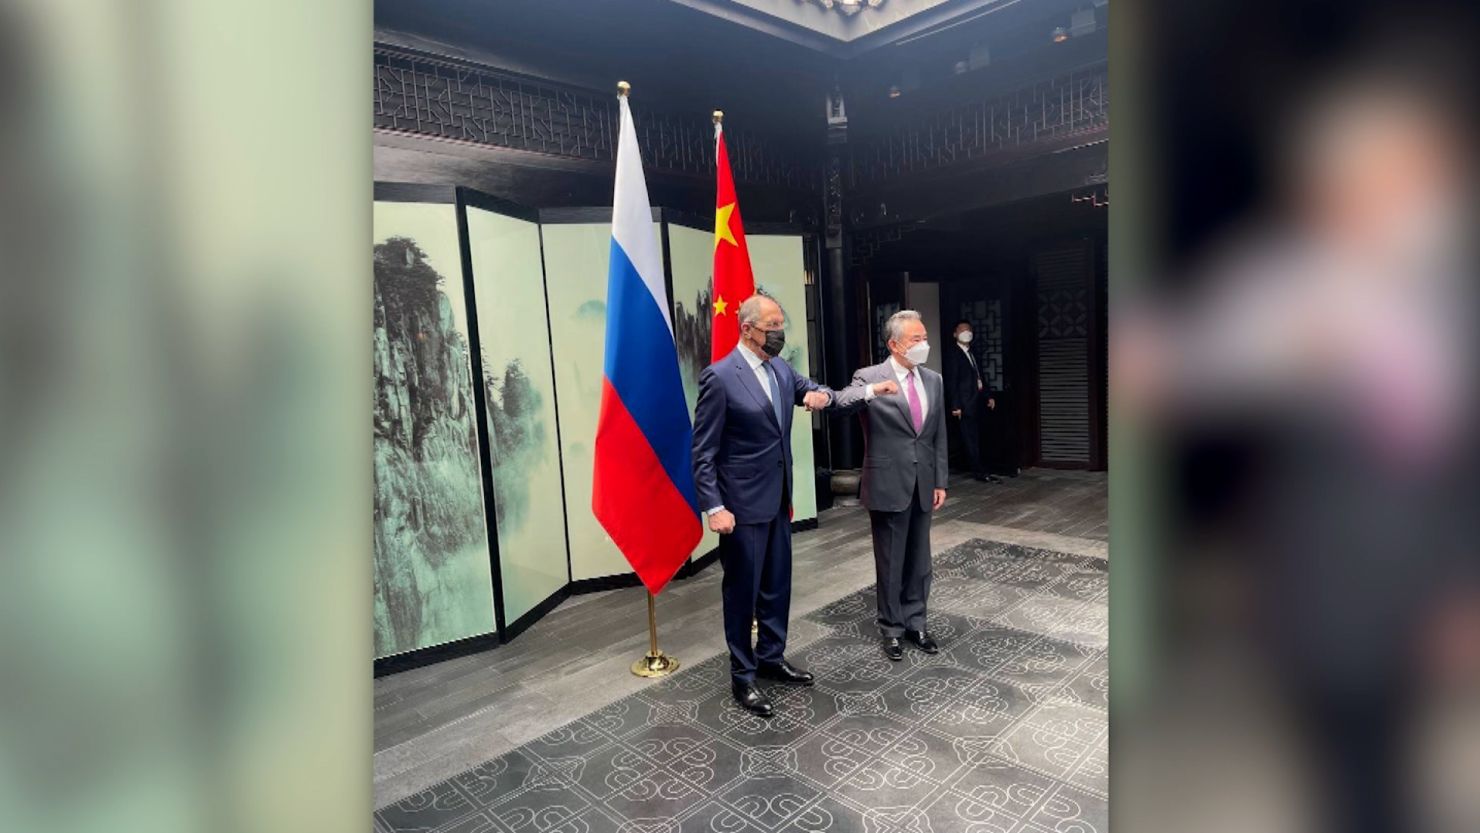 Russian Foreign Minister Sergey Lavrov and Chinese Foreign Minister Wang Yi meet in Tunxi, China, on March 30.